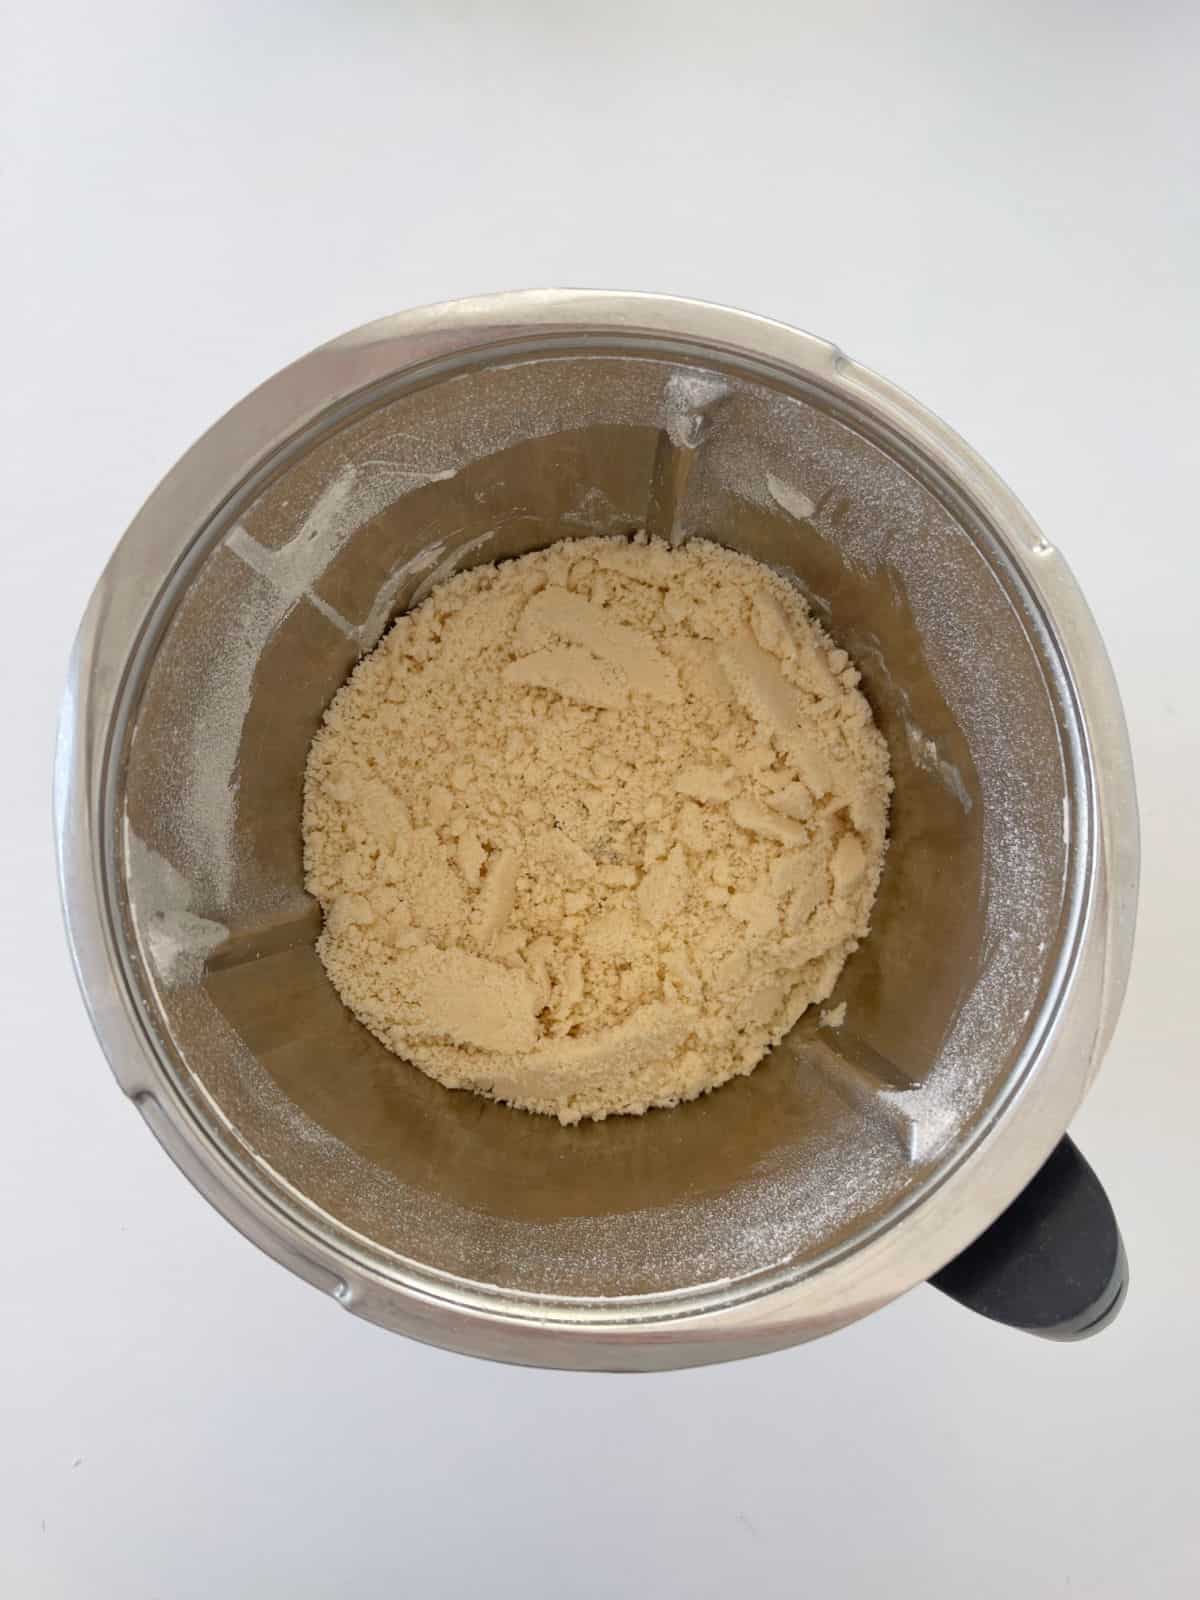 Combined self-raising flour, butter and salt in a thermomix bowl.